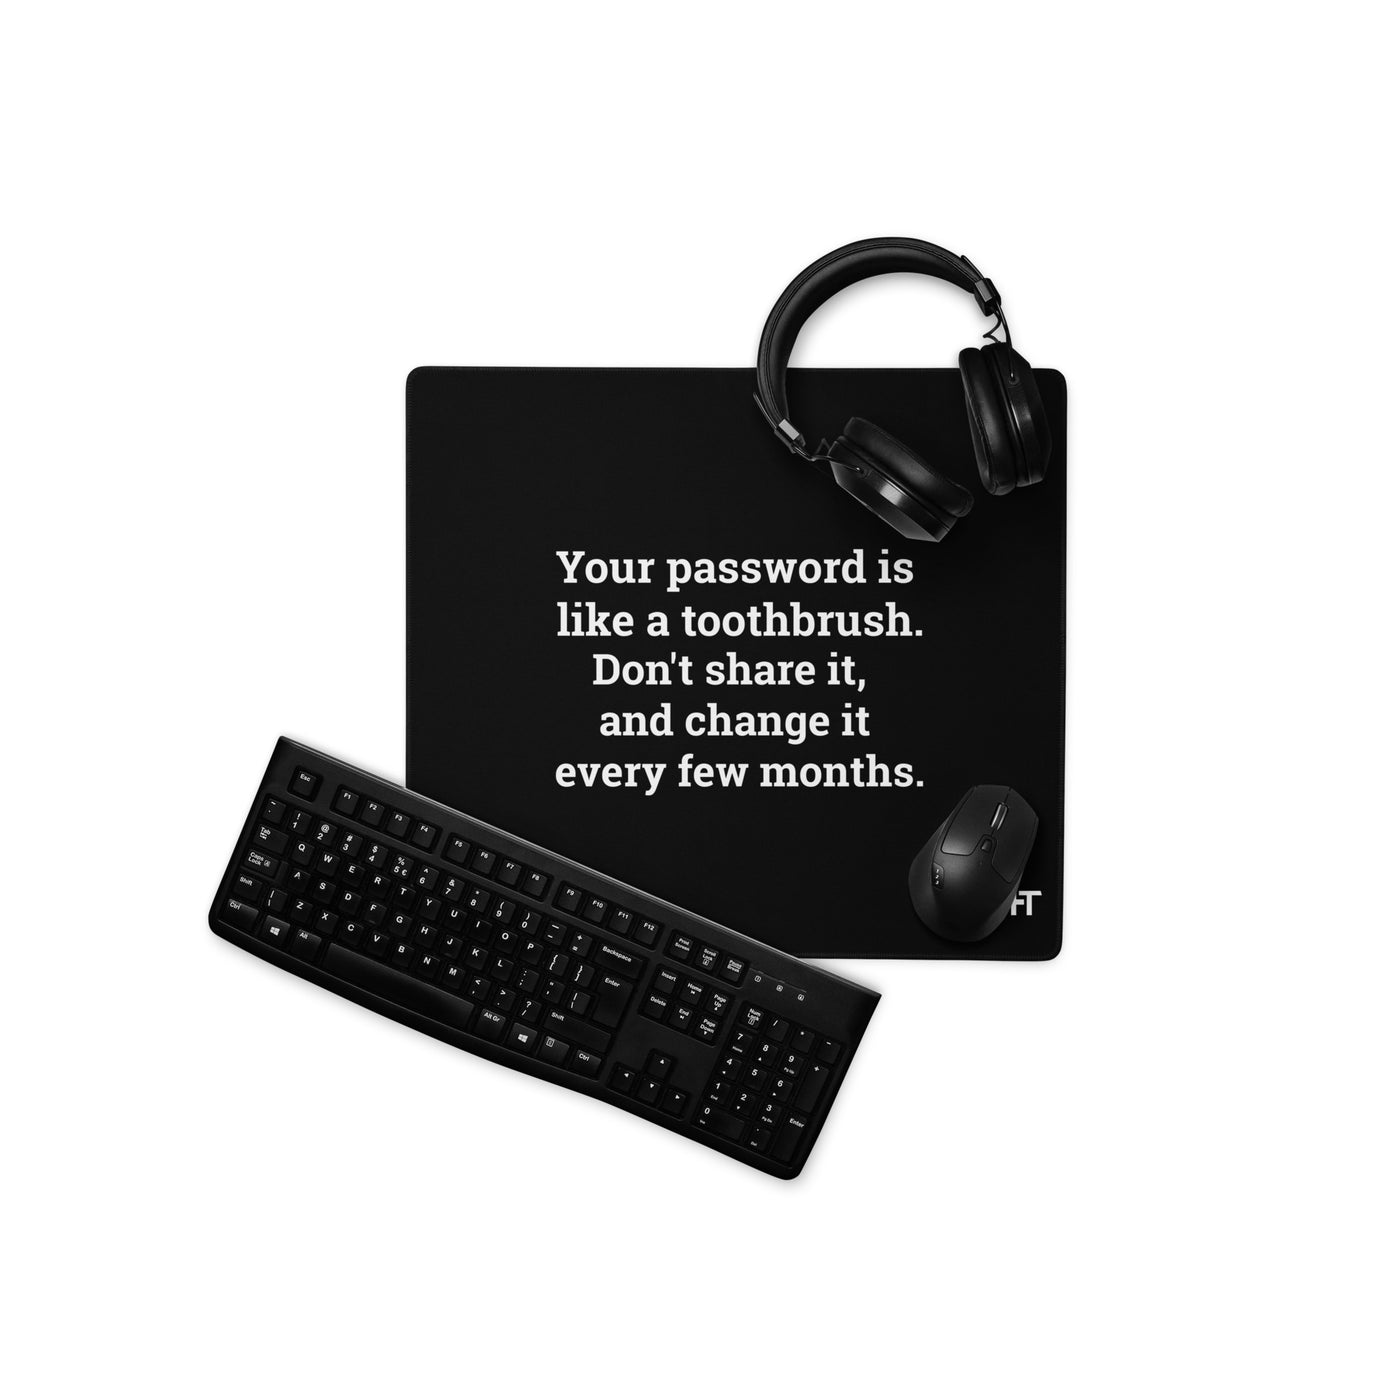 Your password is like a toothbrush V3 - Desk Mat